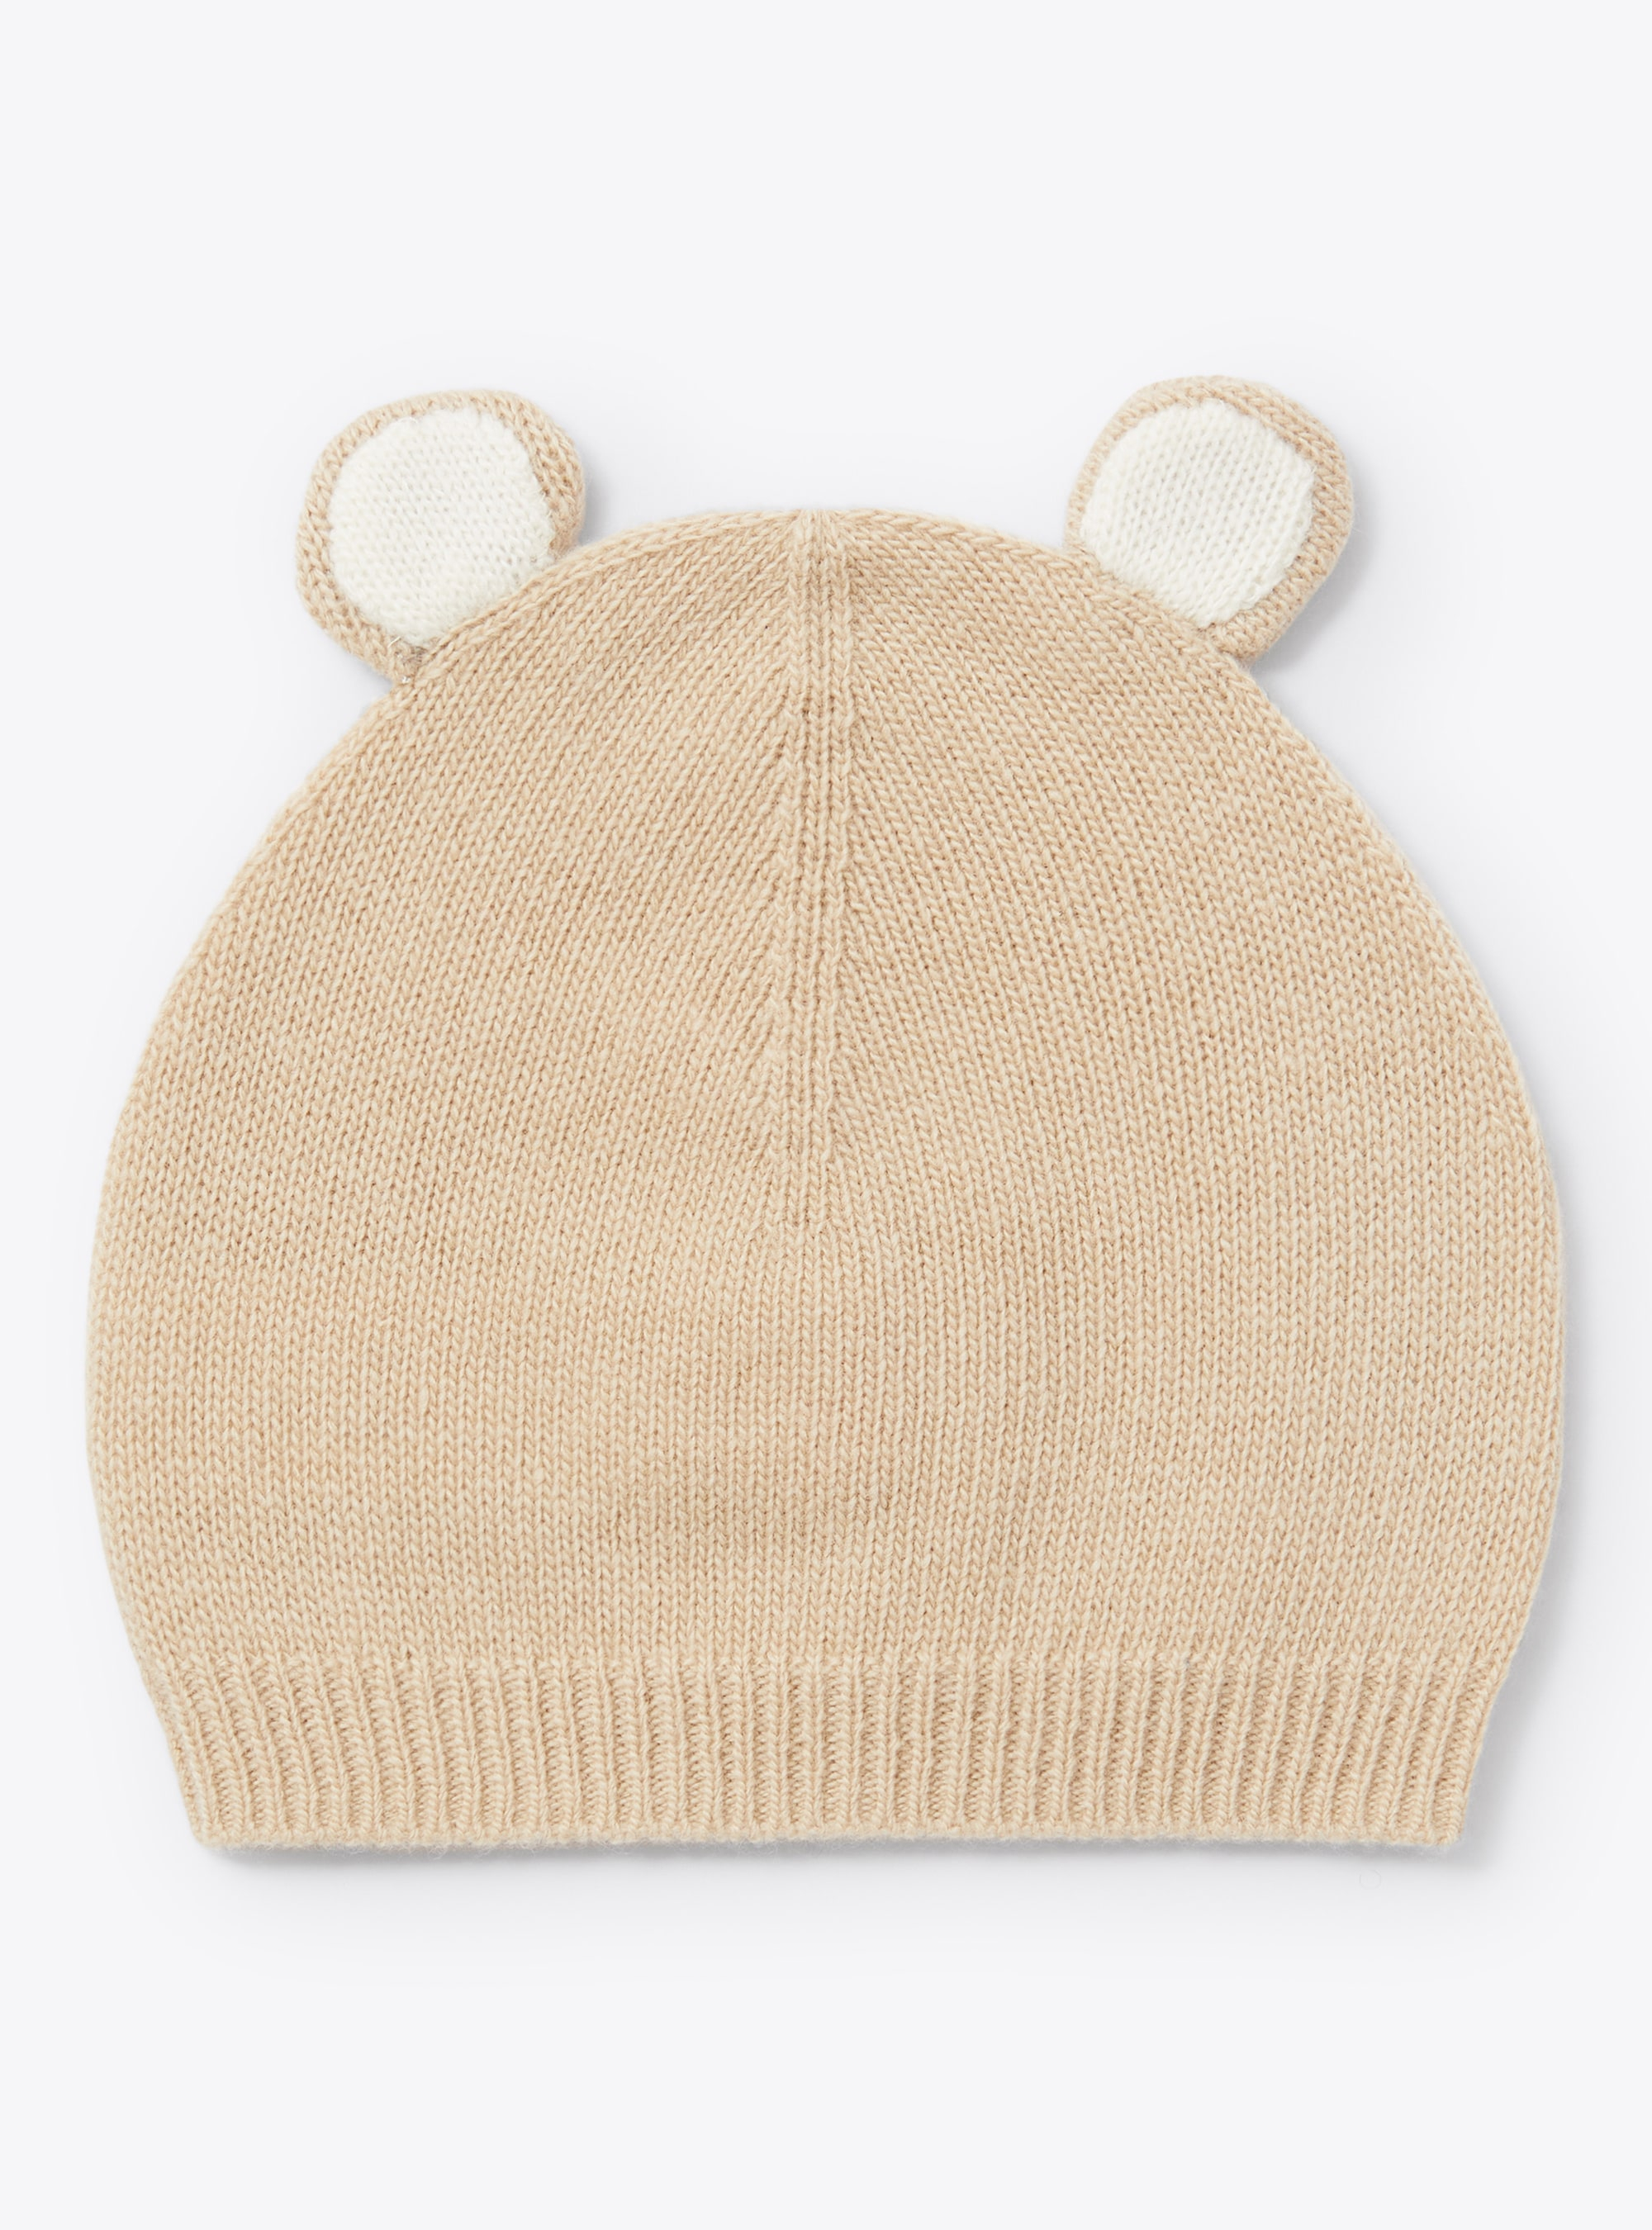 Baby boys' hat with little ears - Accessories - Il Gufo